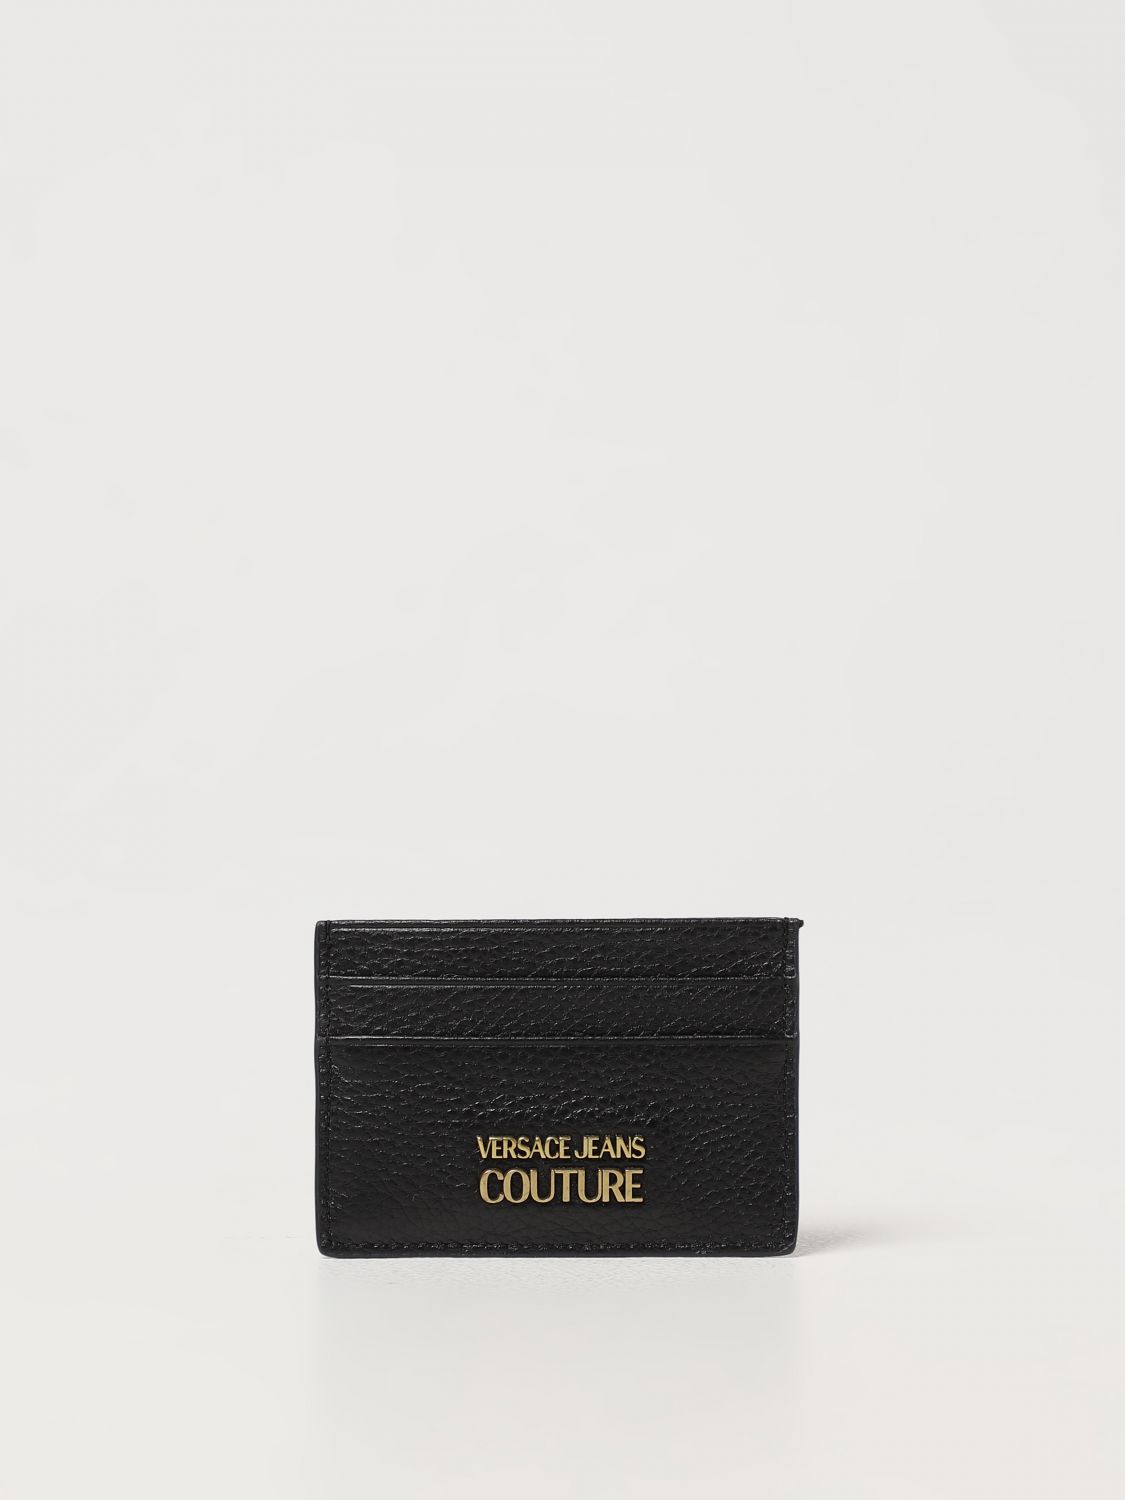 Versace Jeans Couture Credit Card Holder In Grained Leather In Black